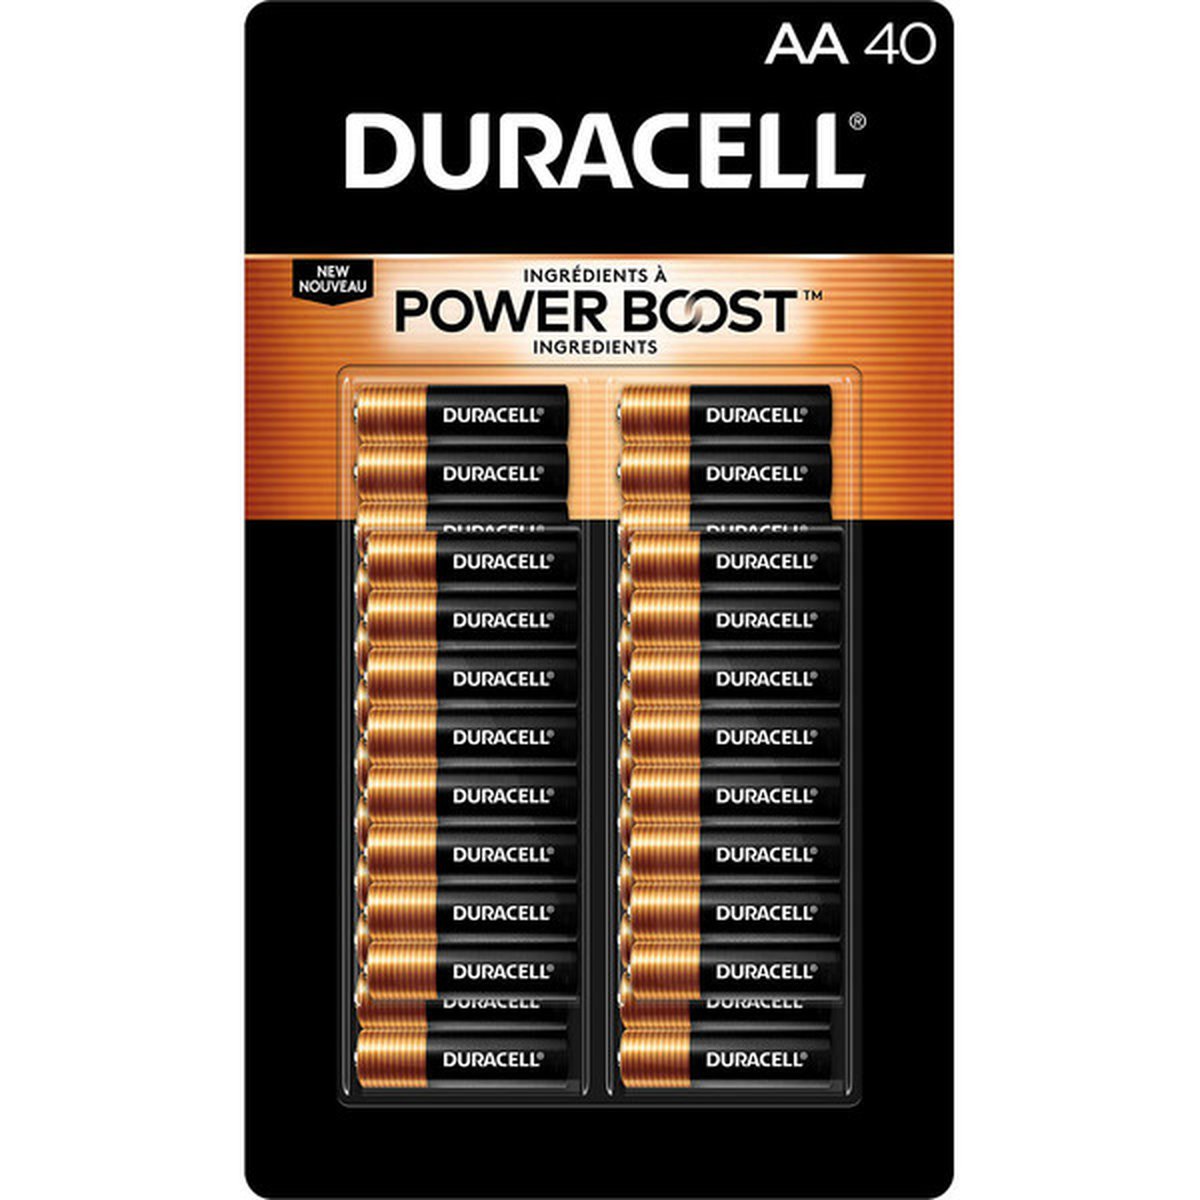 Duracell AA Batteries 40ct Power Boost